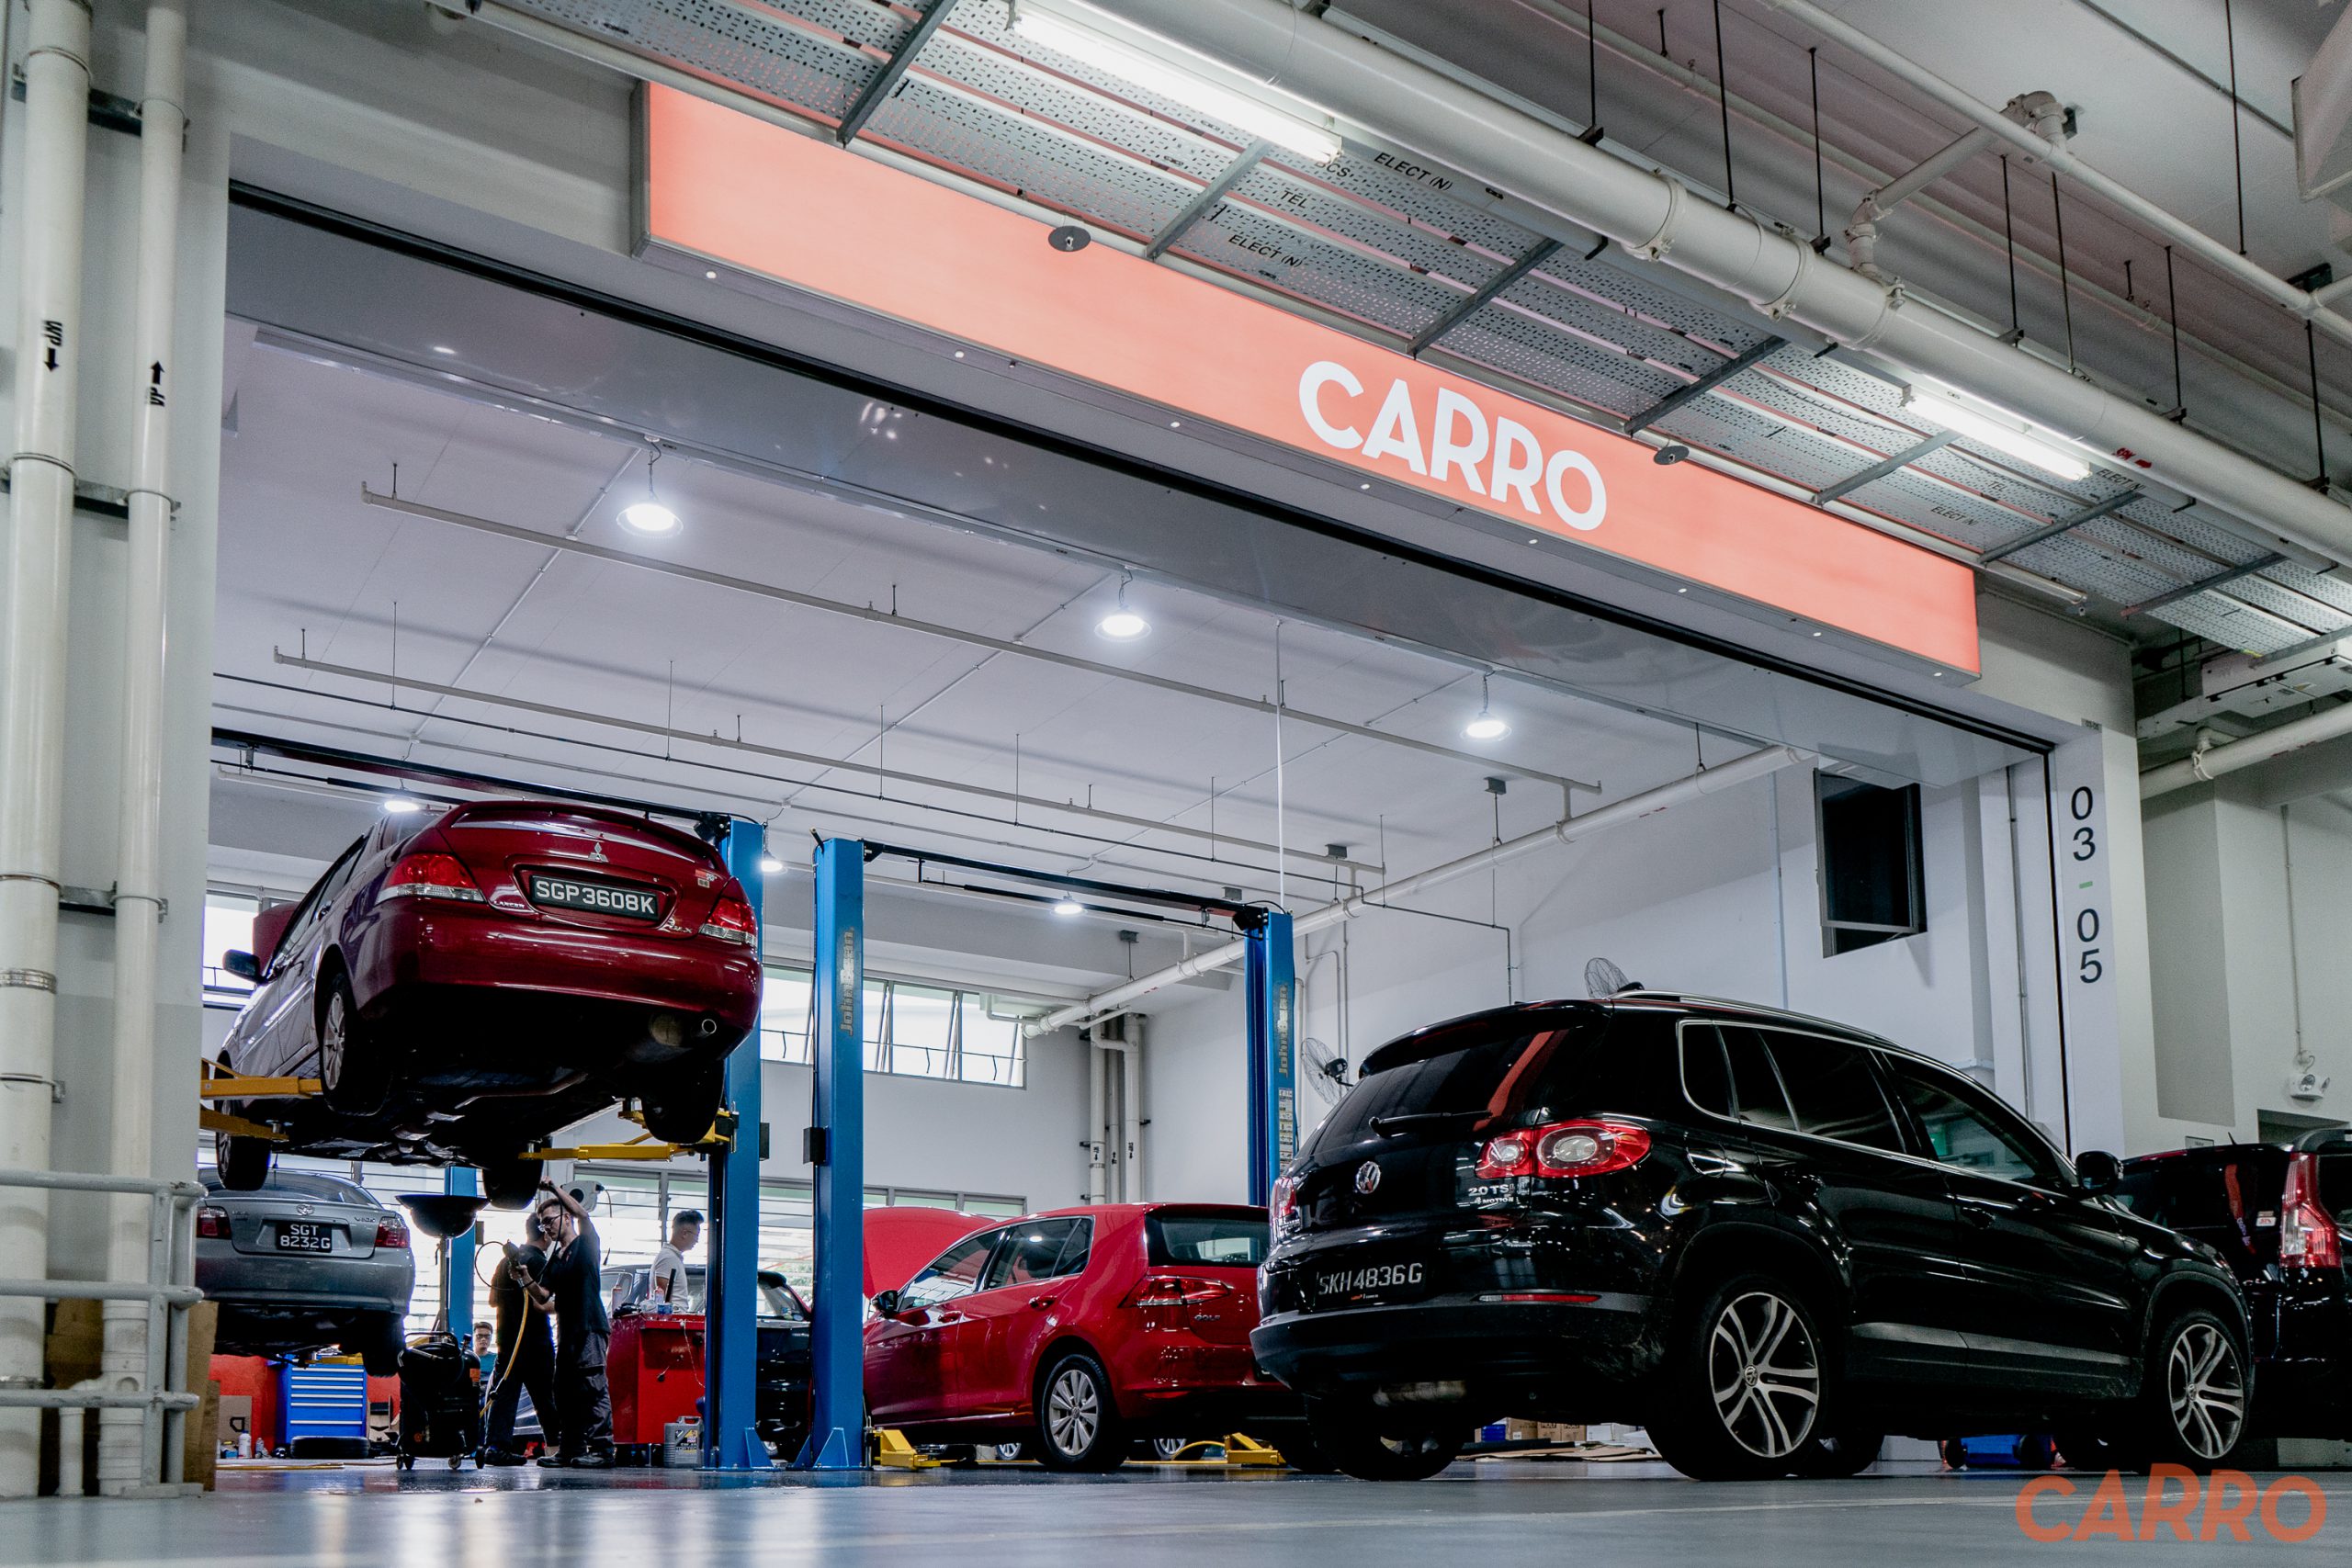 CARRO Care Workshop: Making Car Care Easier for You